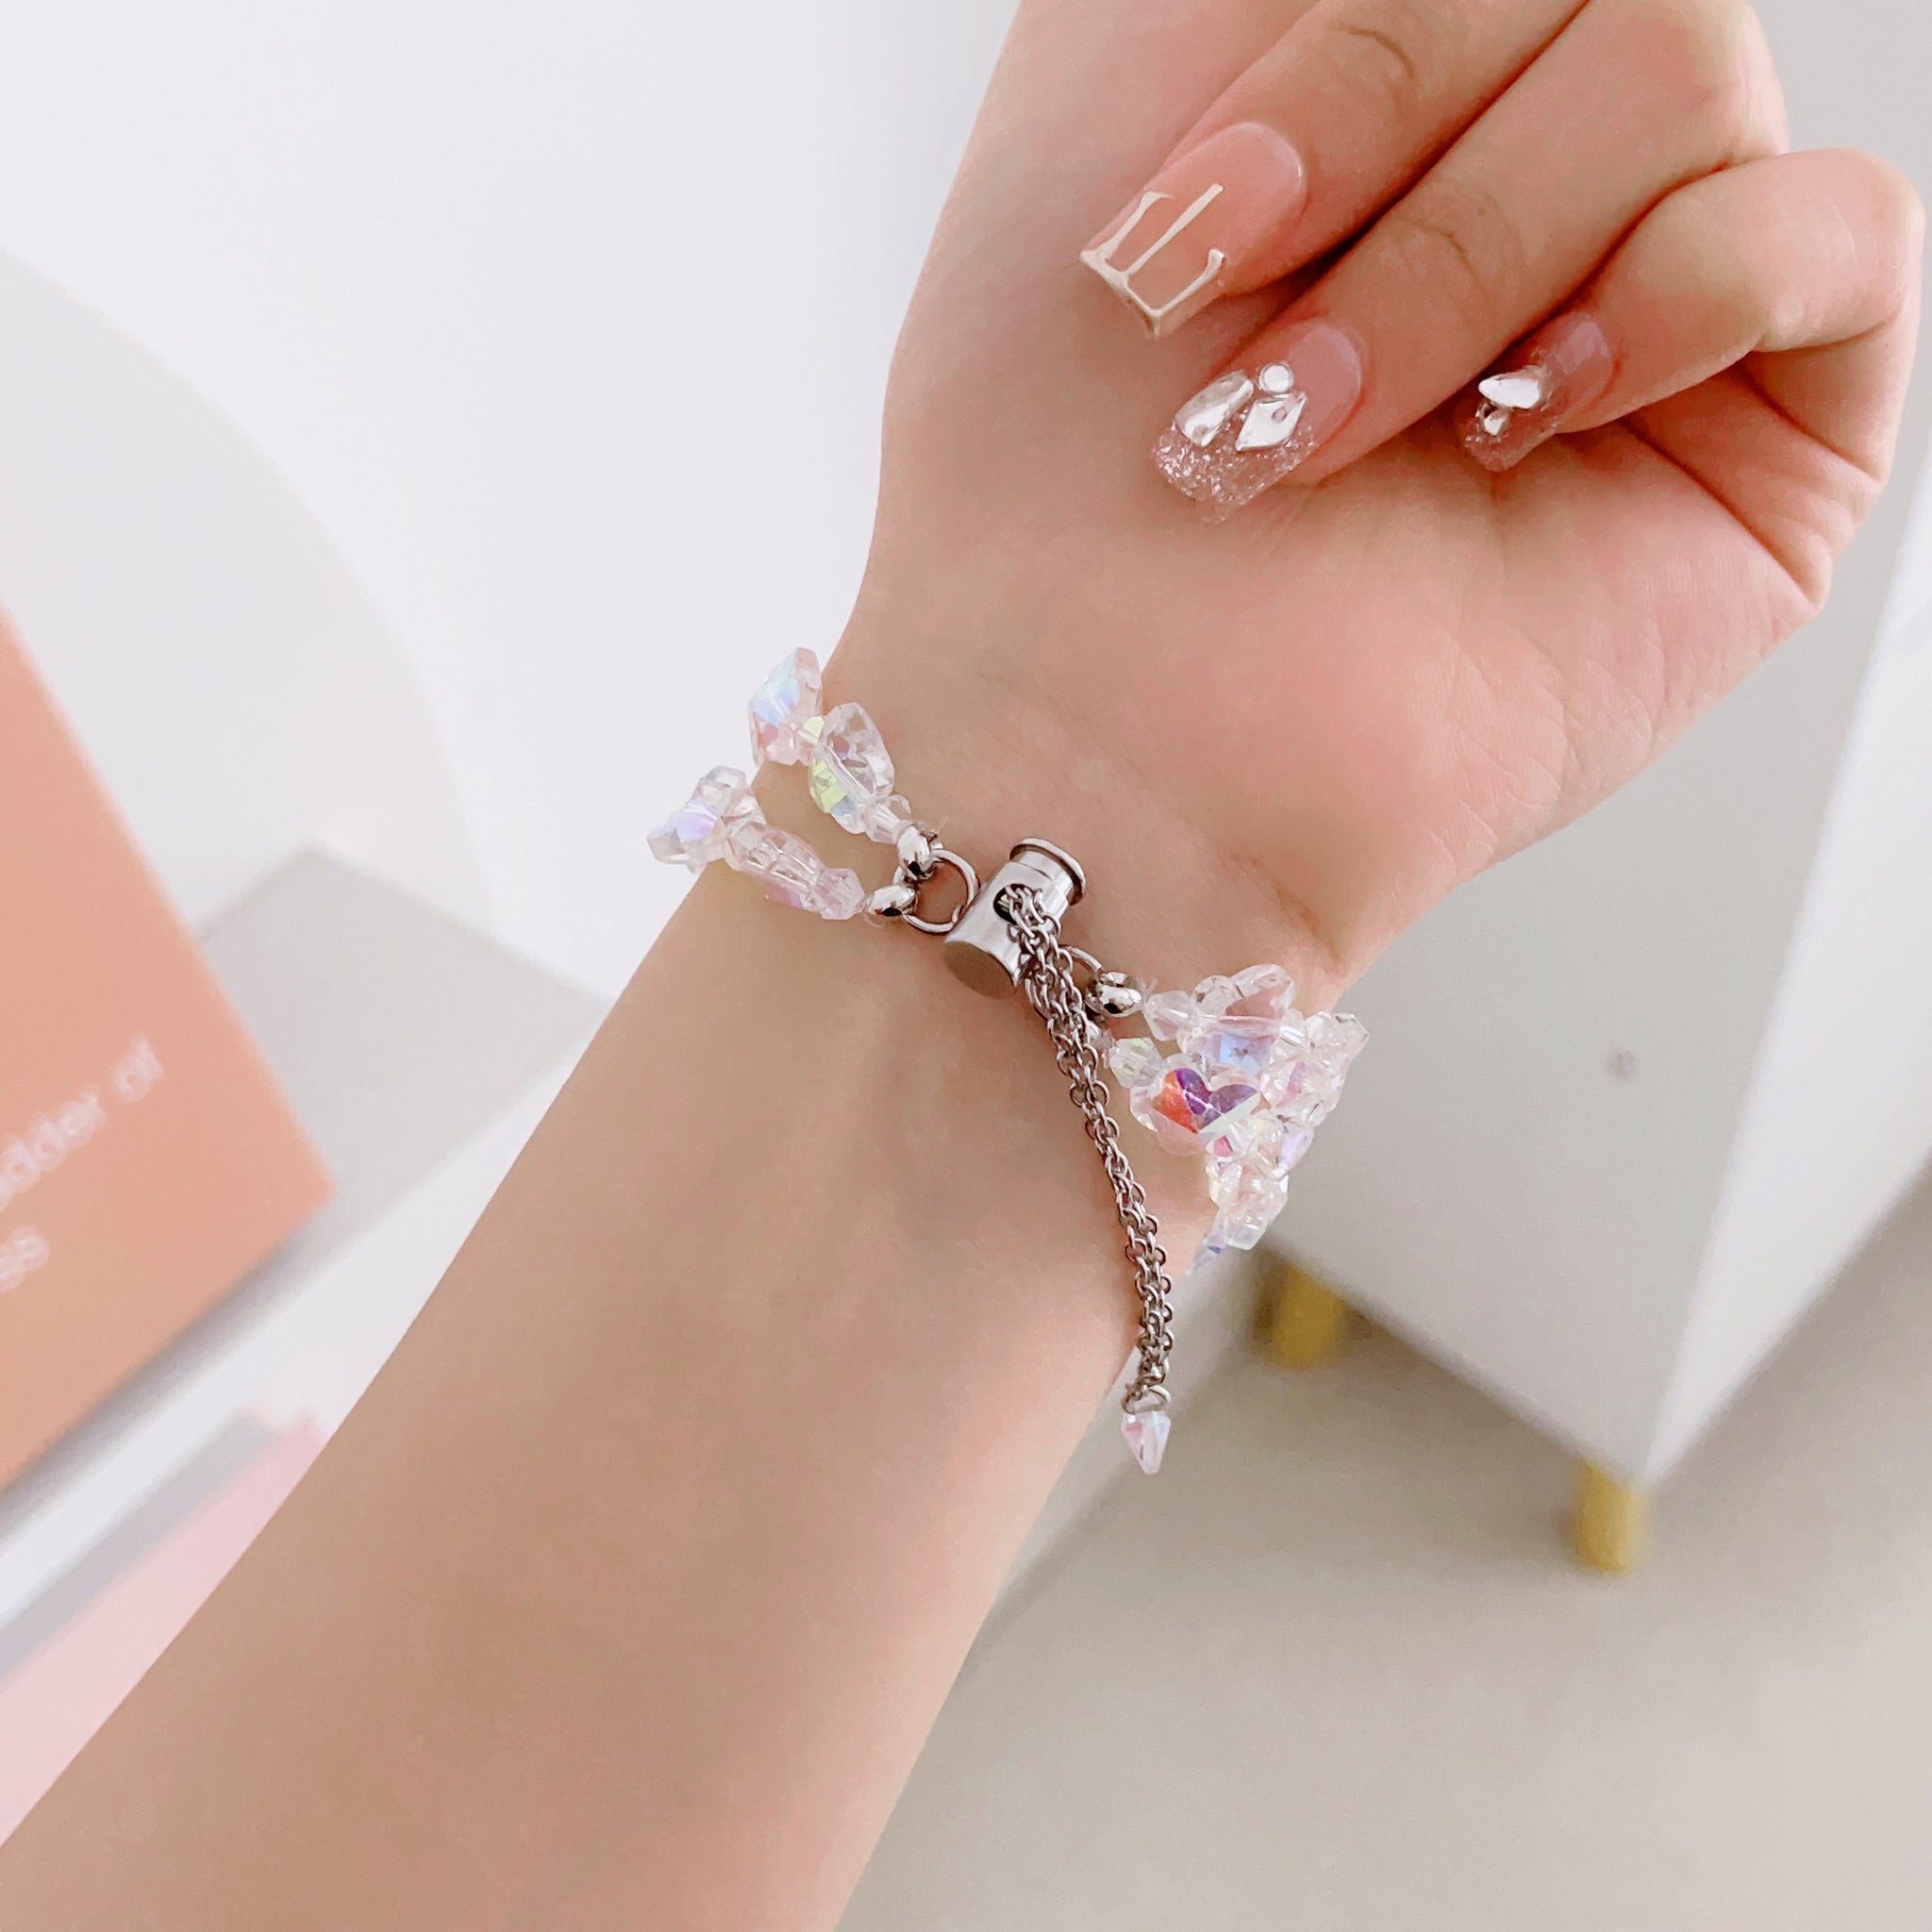 Crystal Butterfly Beads Charm Bracelet Apple Watch Bands for iWatch All Series